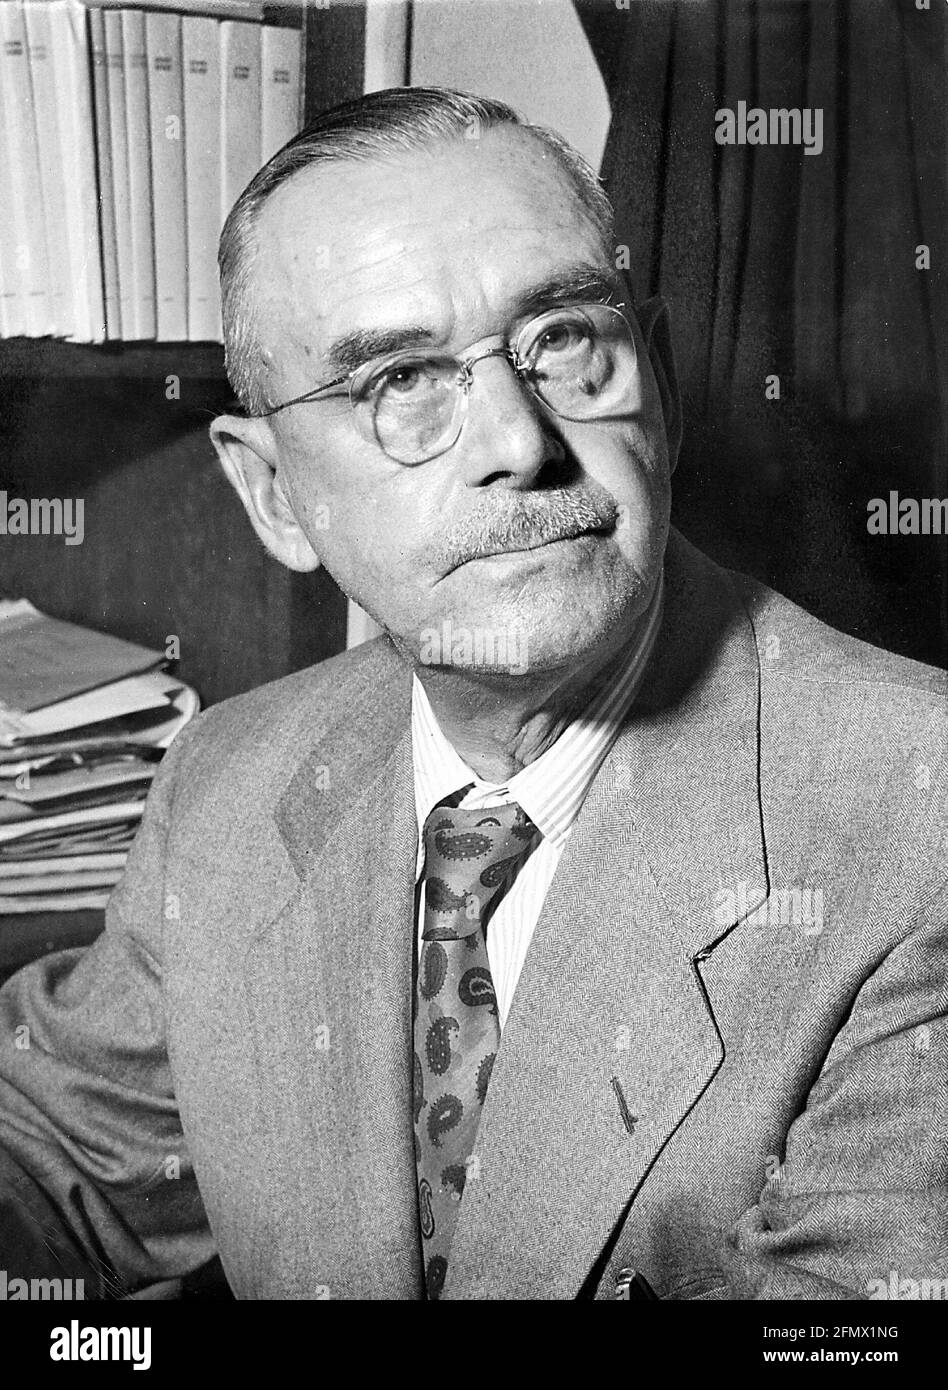 Mann, Thomas, 6.6.1875 - 12.8.1955, German author / writer, Nobel prize laureate for Literature 1929, ADDITIONAL-RIGHTS-CLEARANCE-INFO-NOT-AVAILABLE Stock Photo